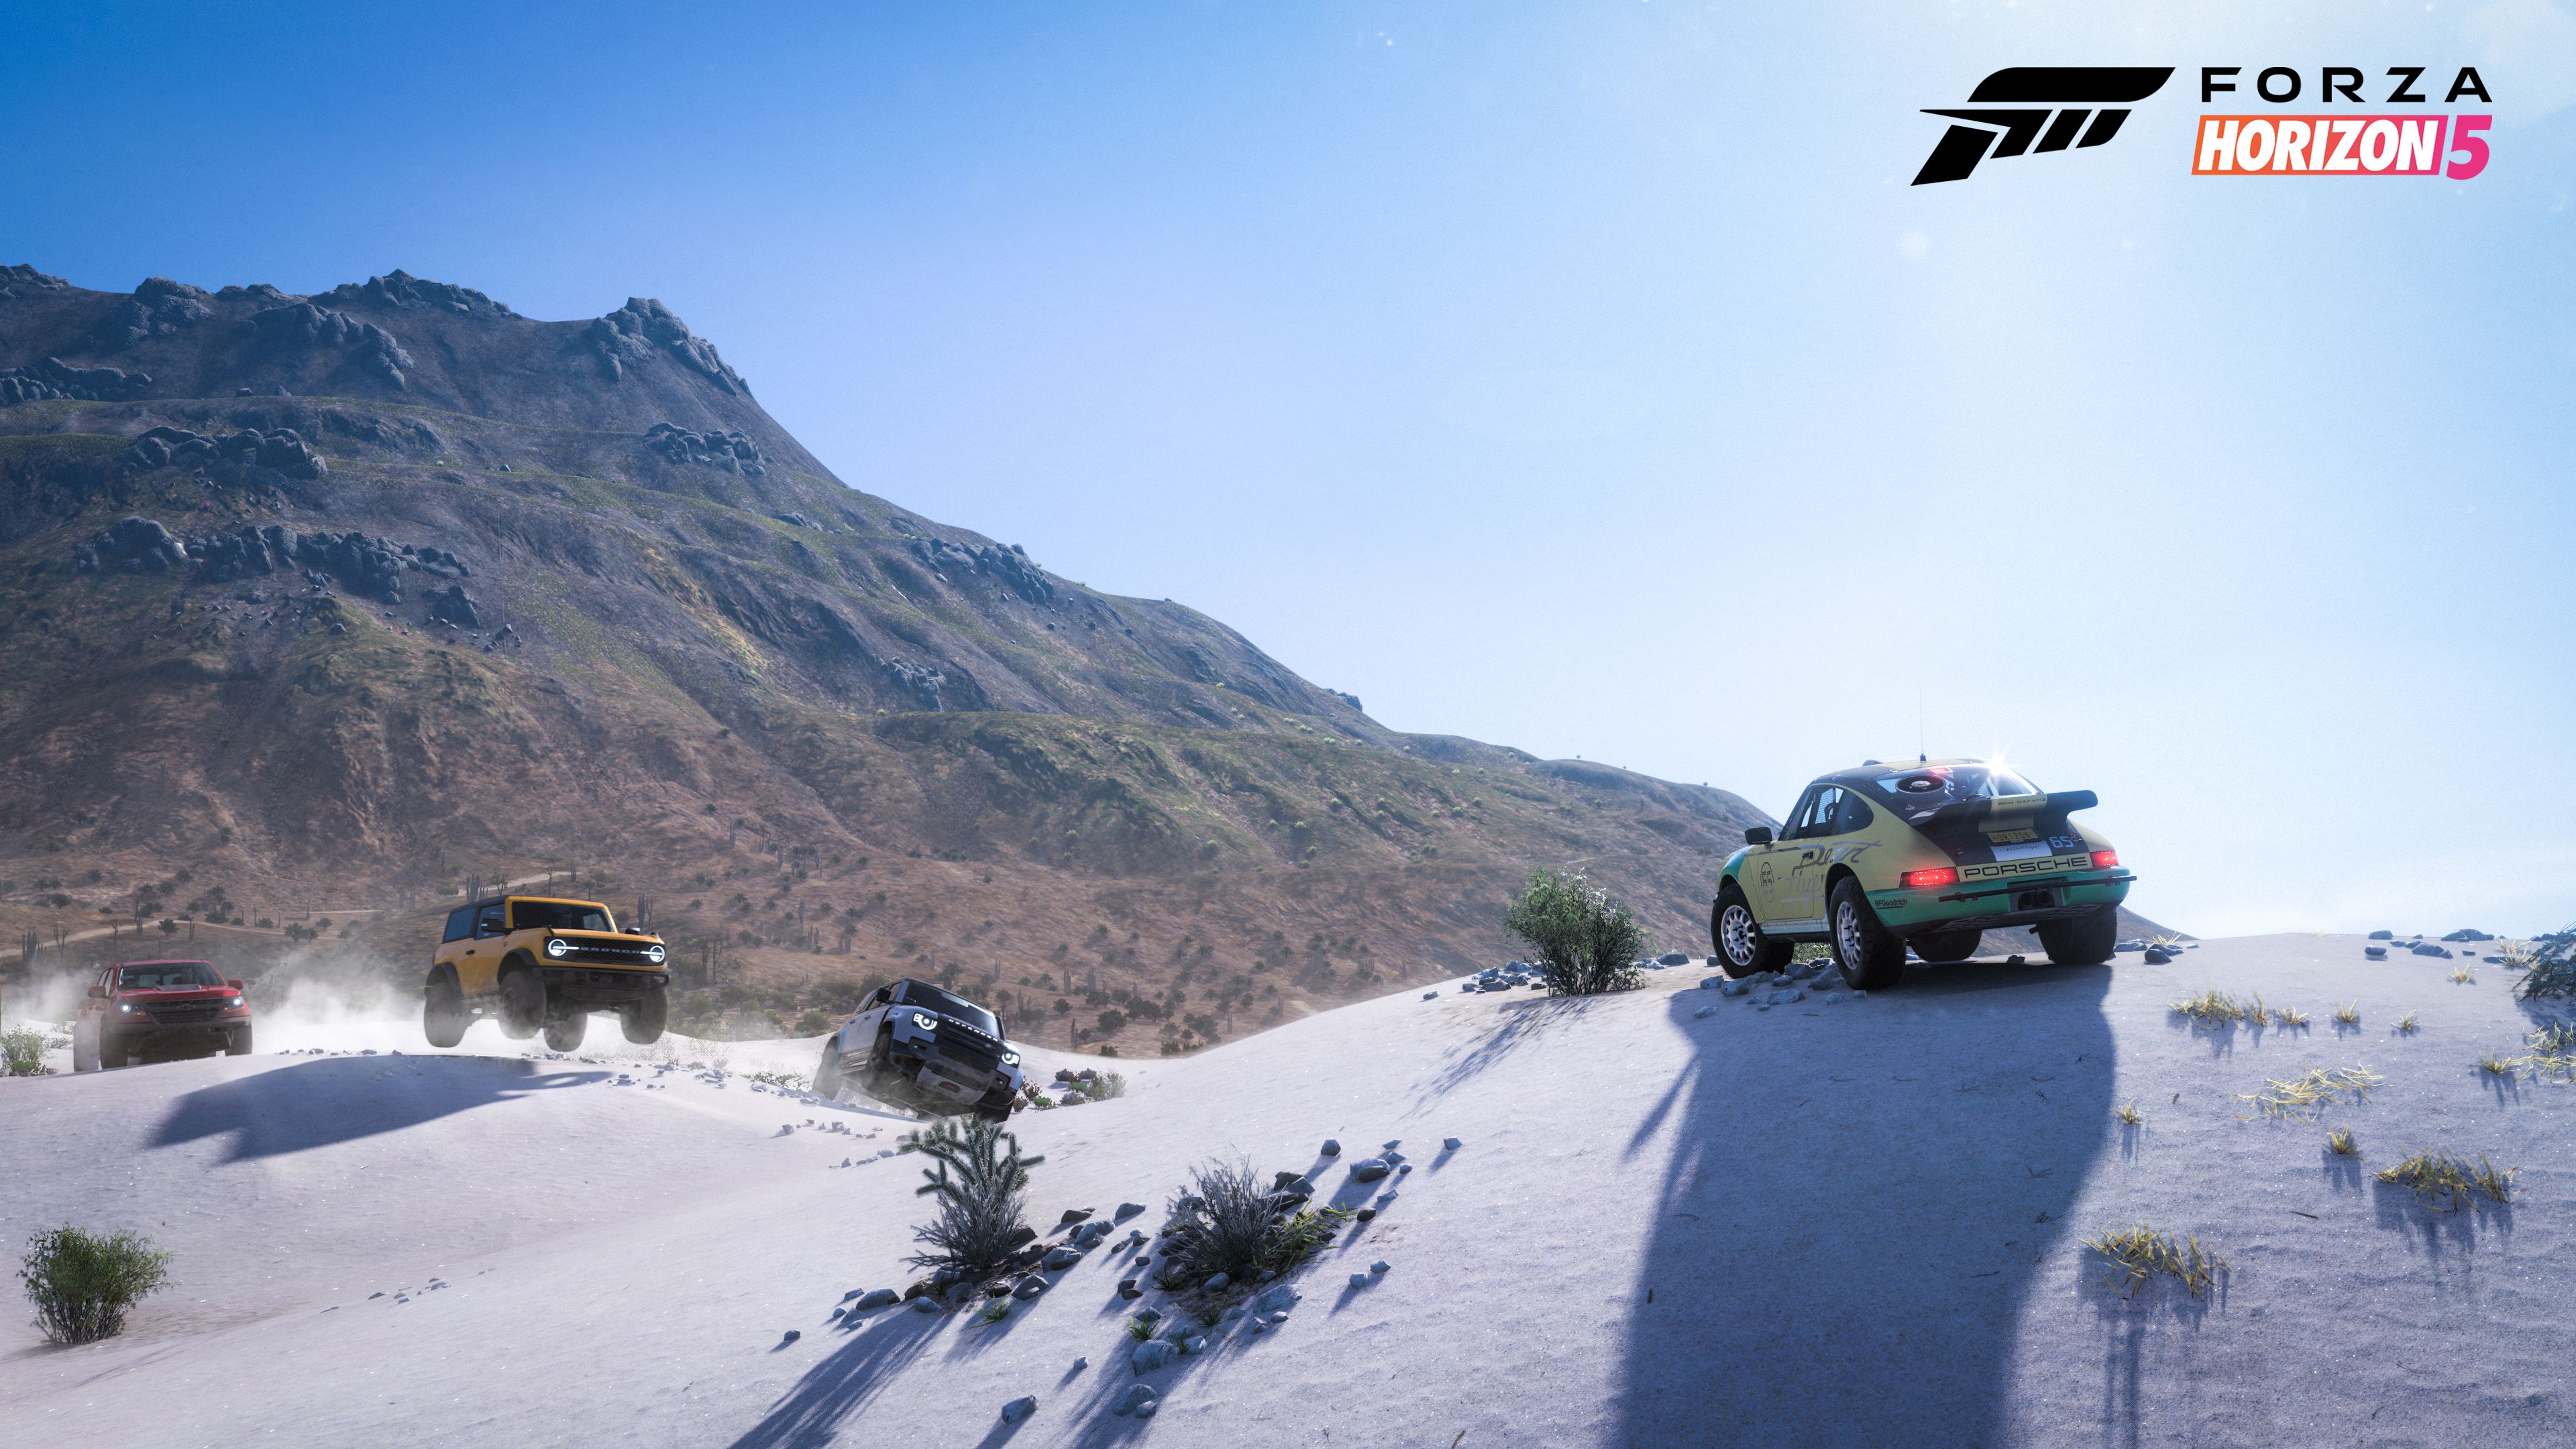 A bunch of vehicles on top of a mountain in Forza Horizon 5